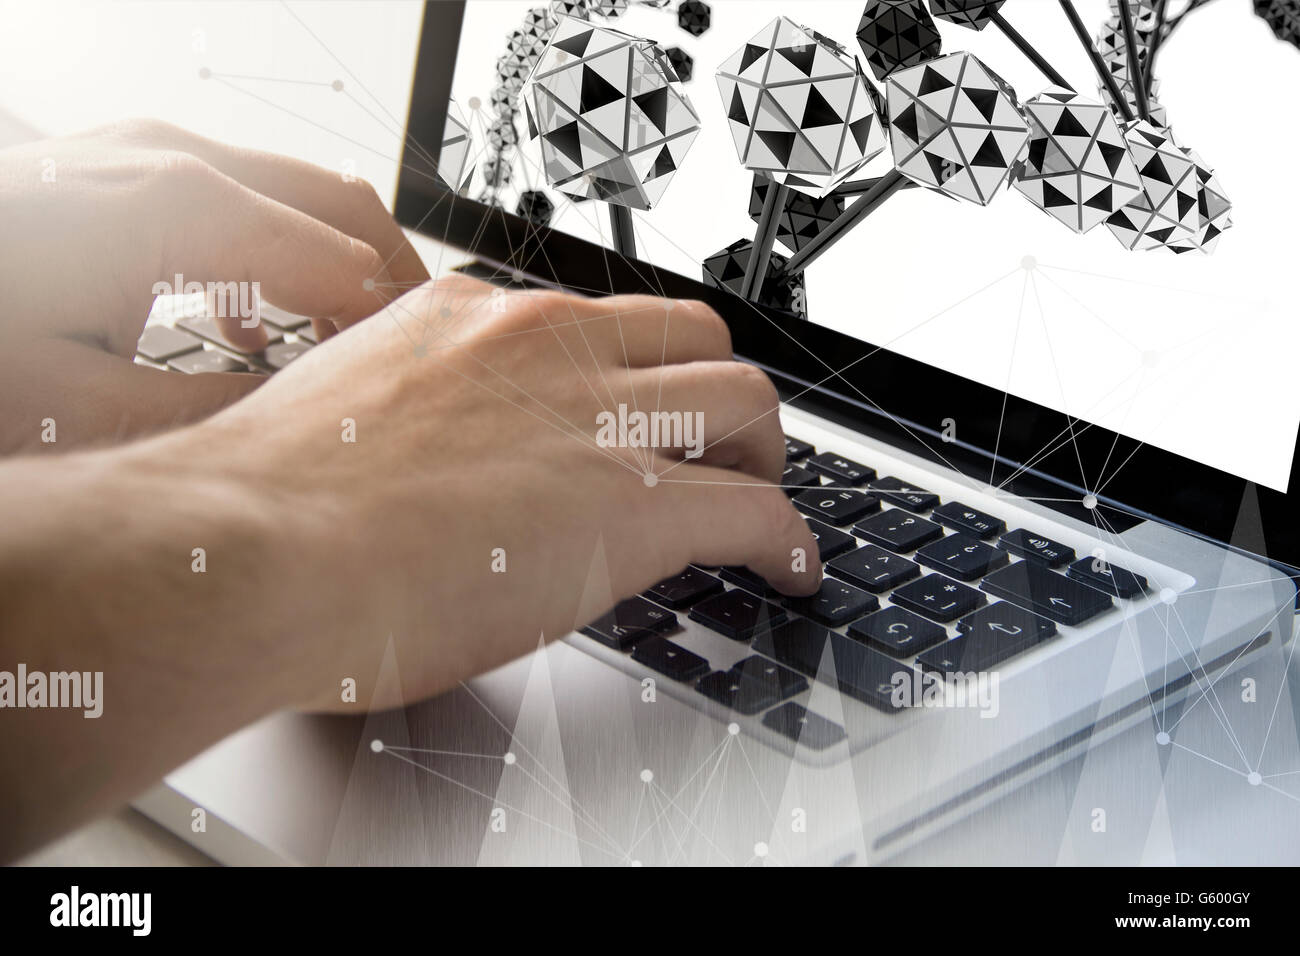 technology and medical concept: man using a laptop with dna chains on the screen. All screen graphics are made up. Stock Photo